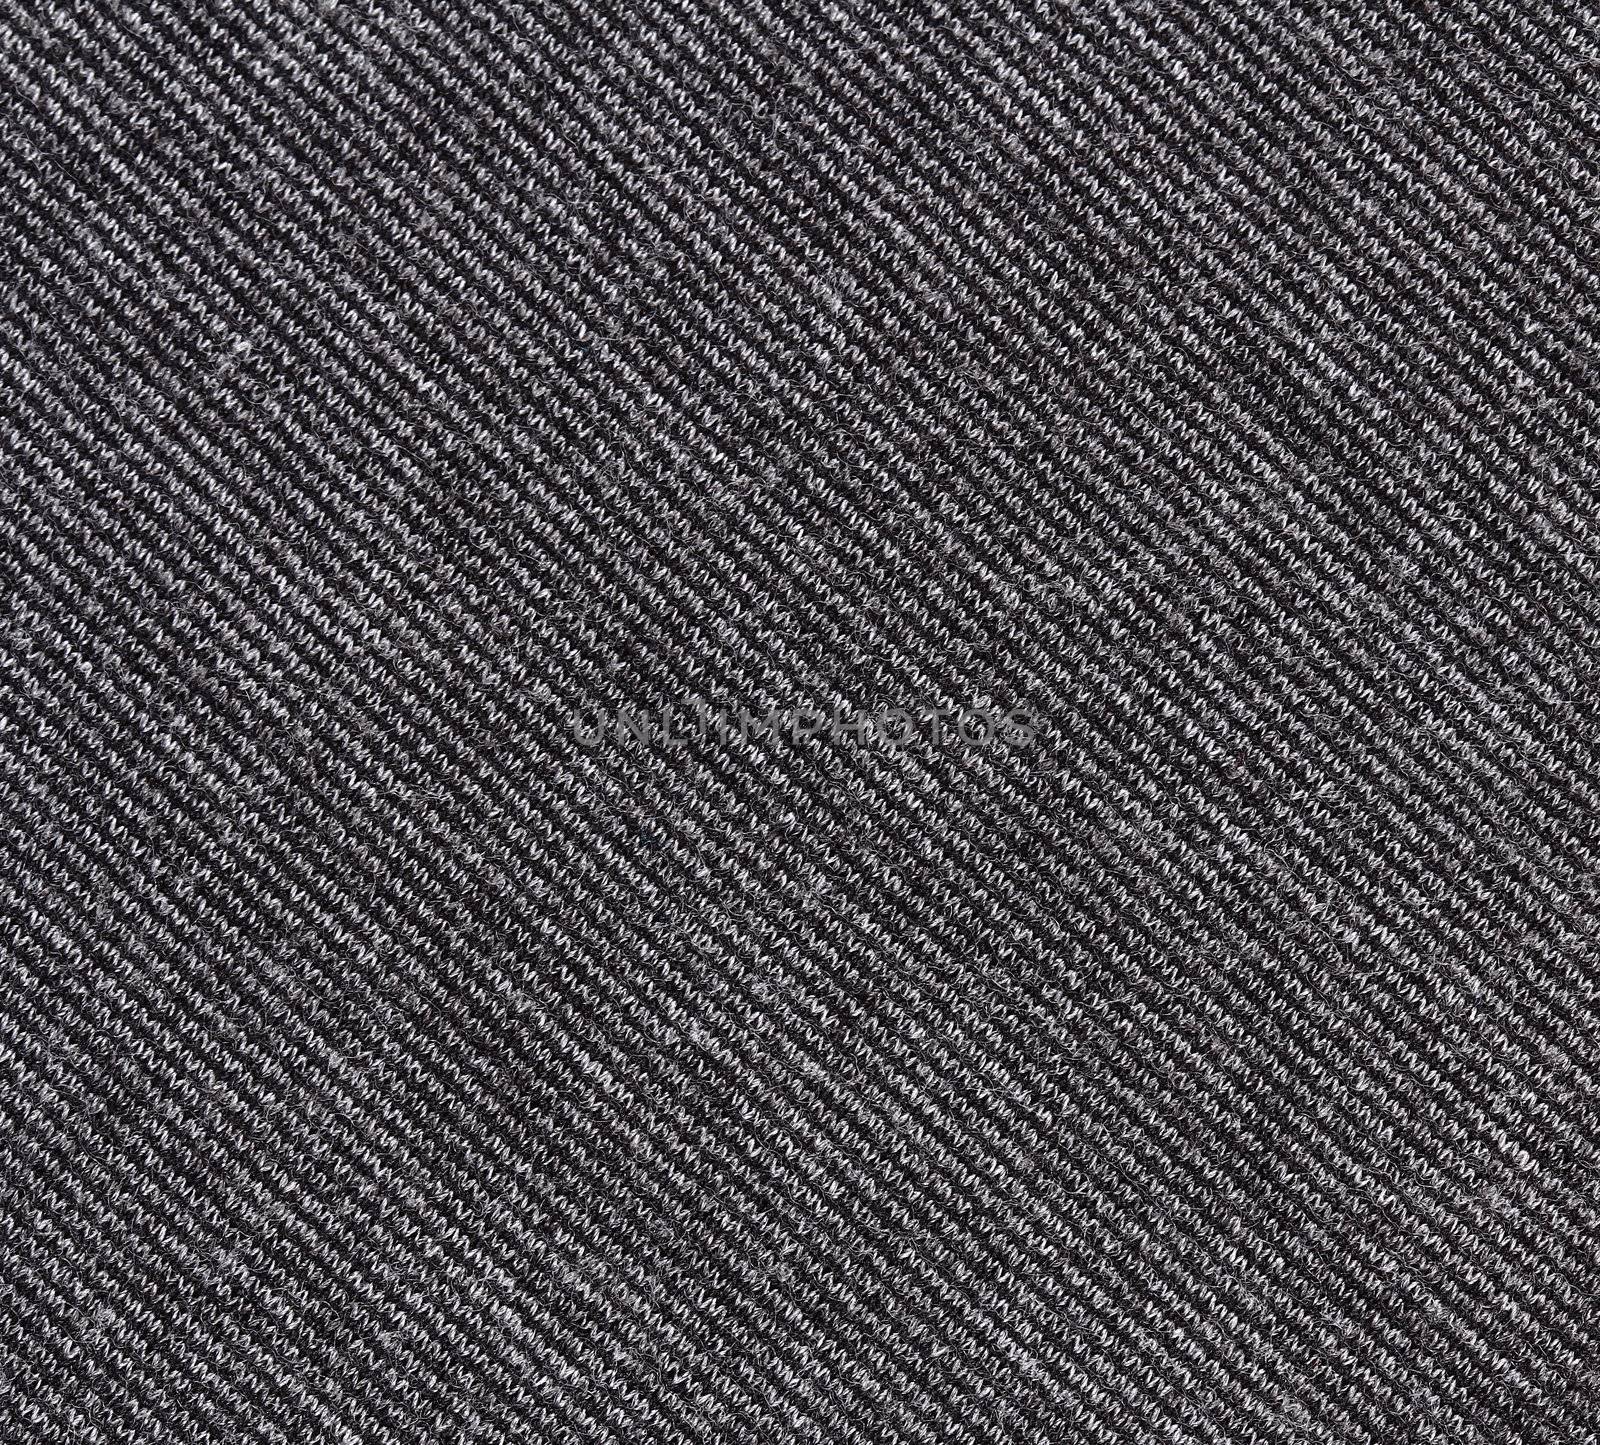 Fabric pattern texture. Clothes background. Close up